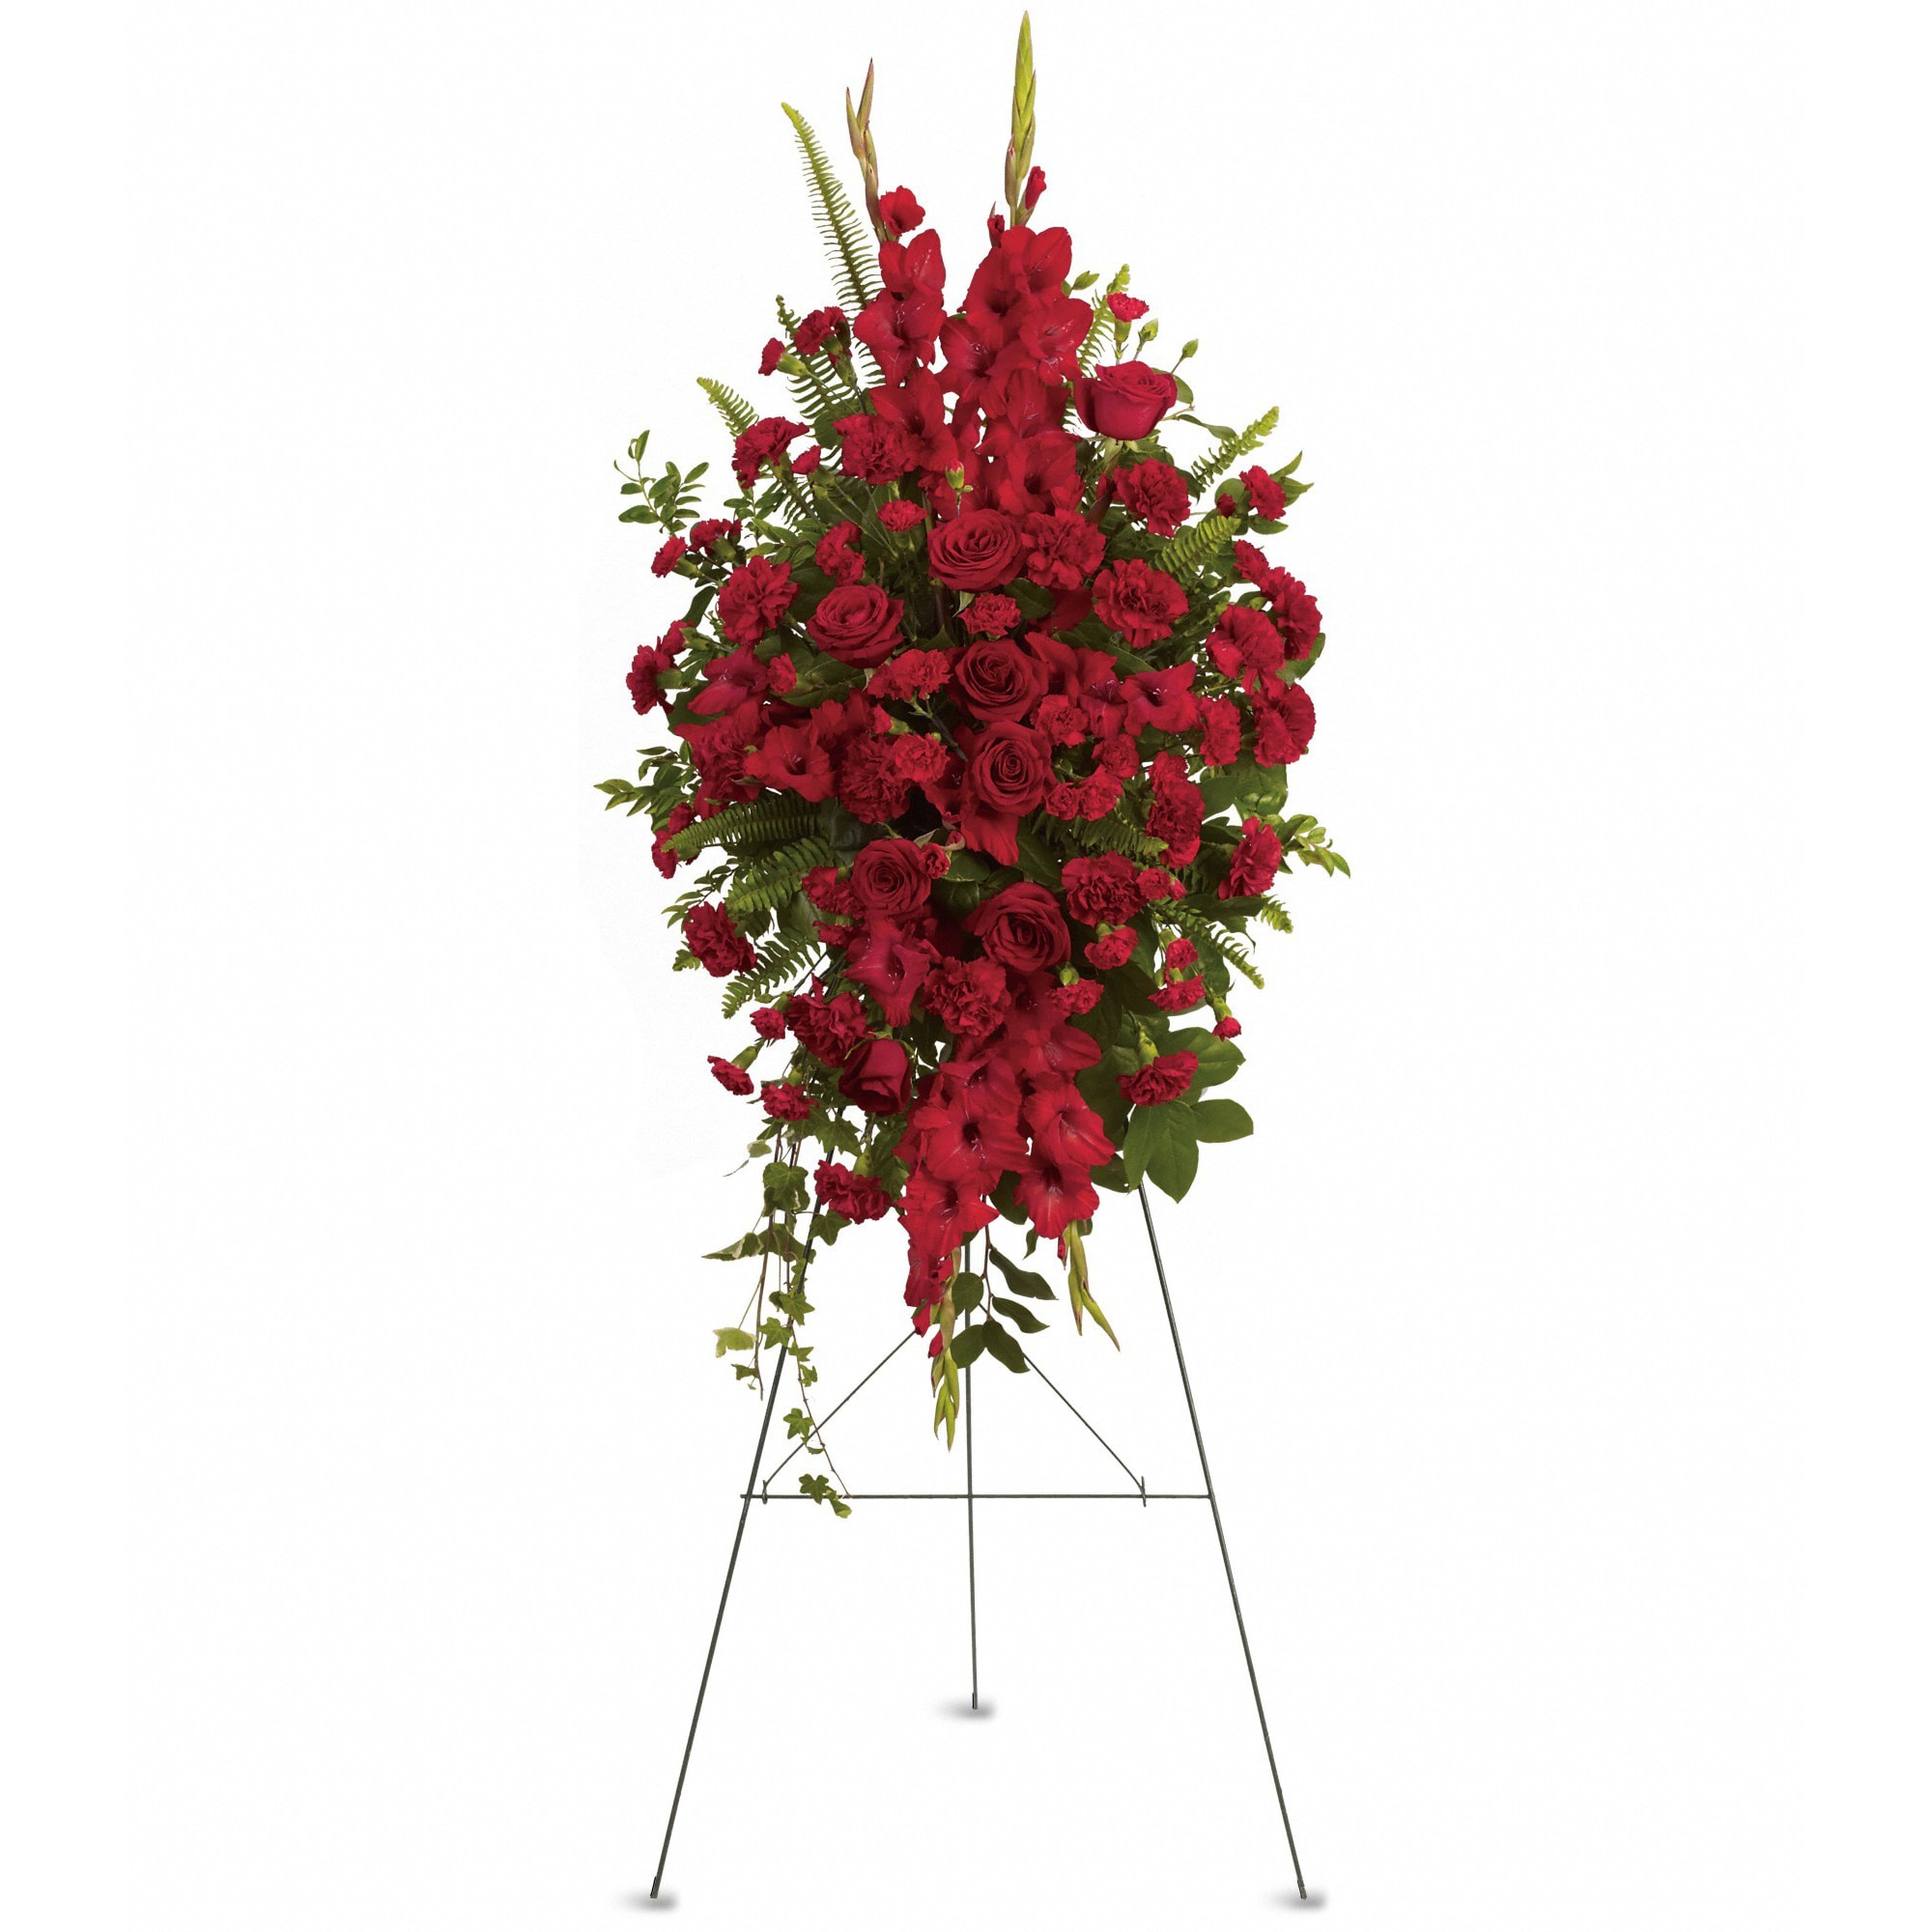 Deep in Our Hearts Spray  - This rich, radiant spray of red roses, gladioli and other popular red flowers during a time of loss conveys a message of reassurance and hope in a difficult time. 